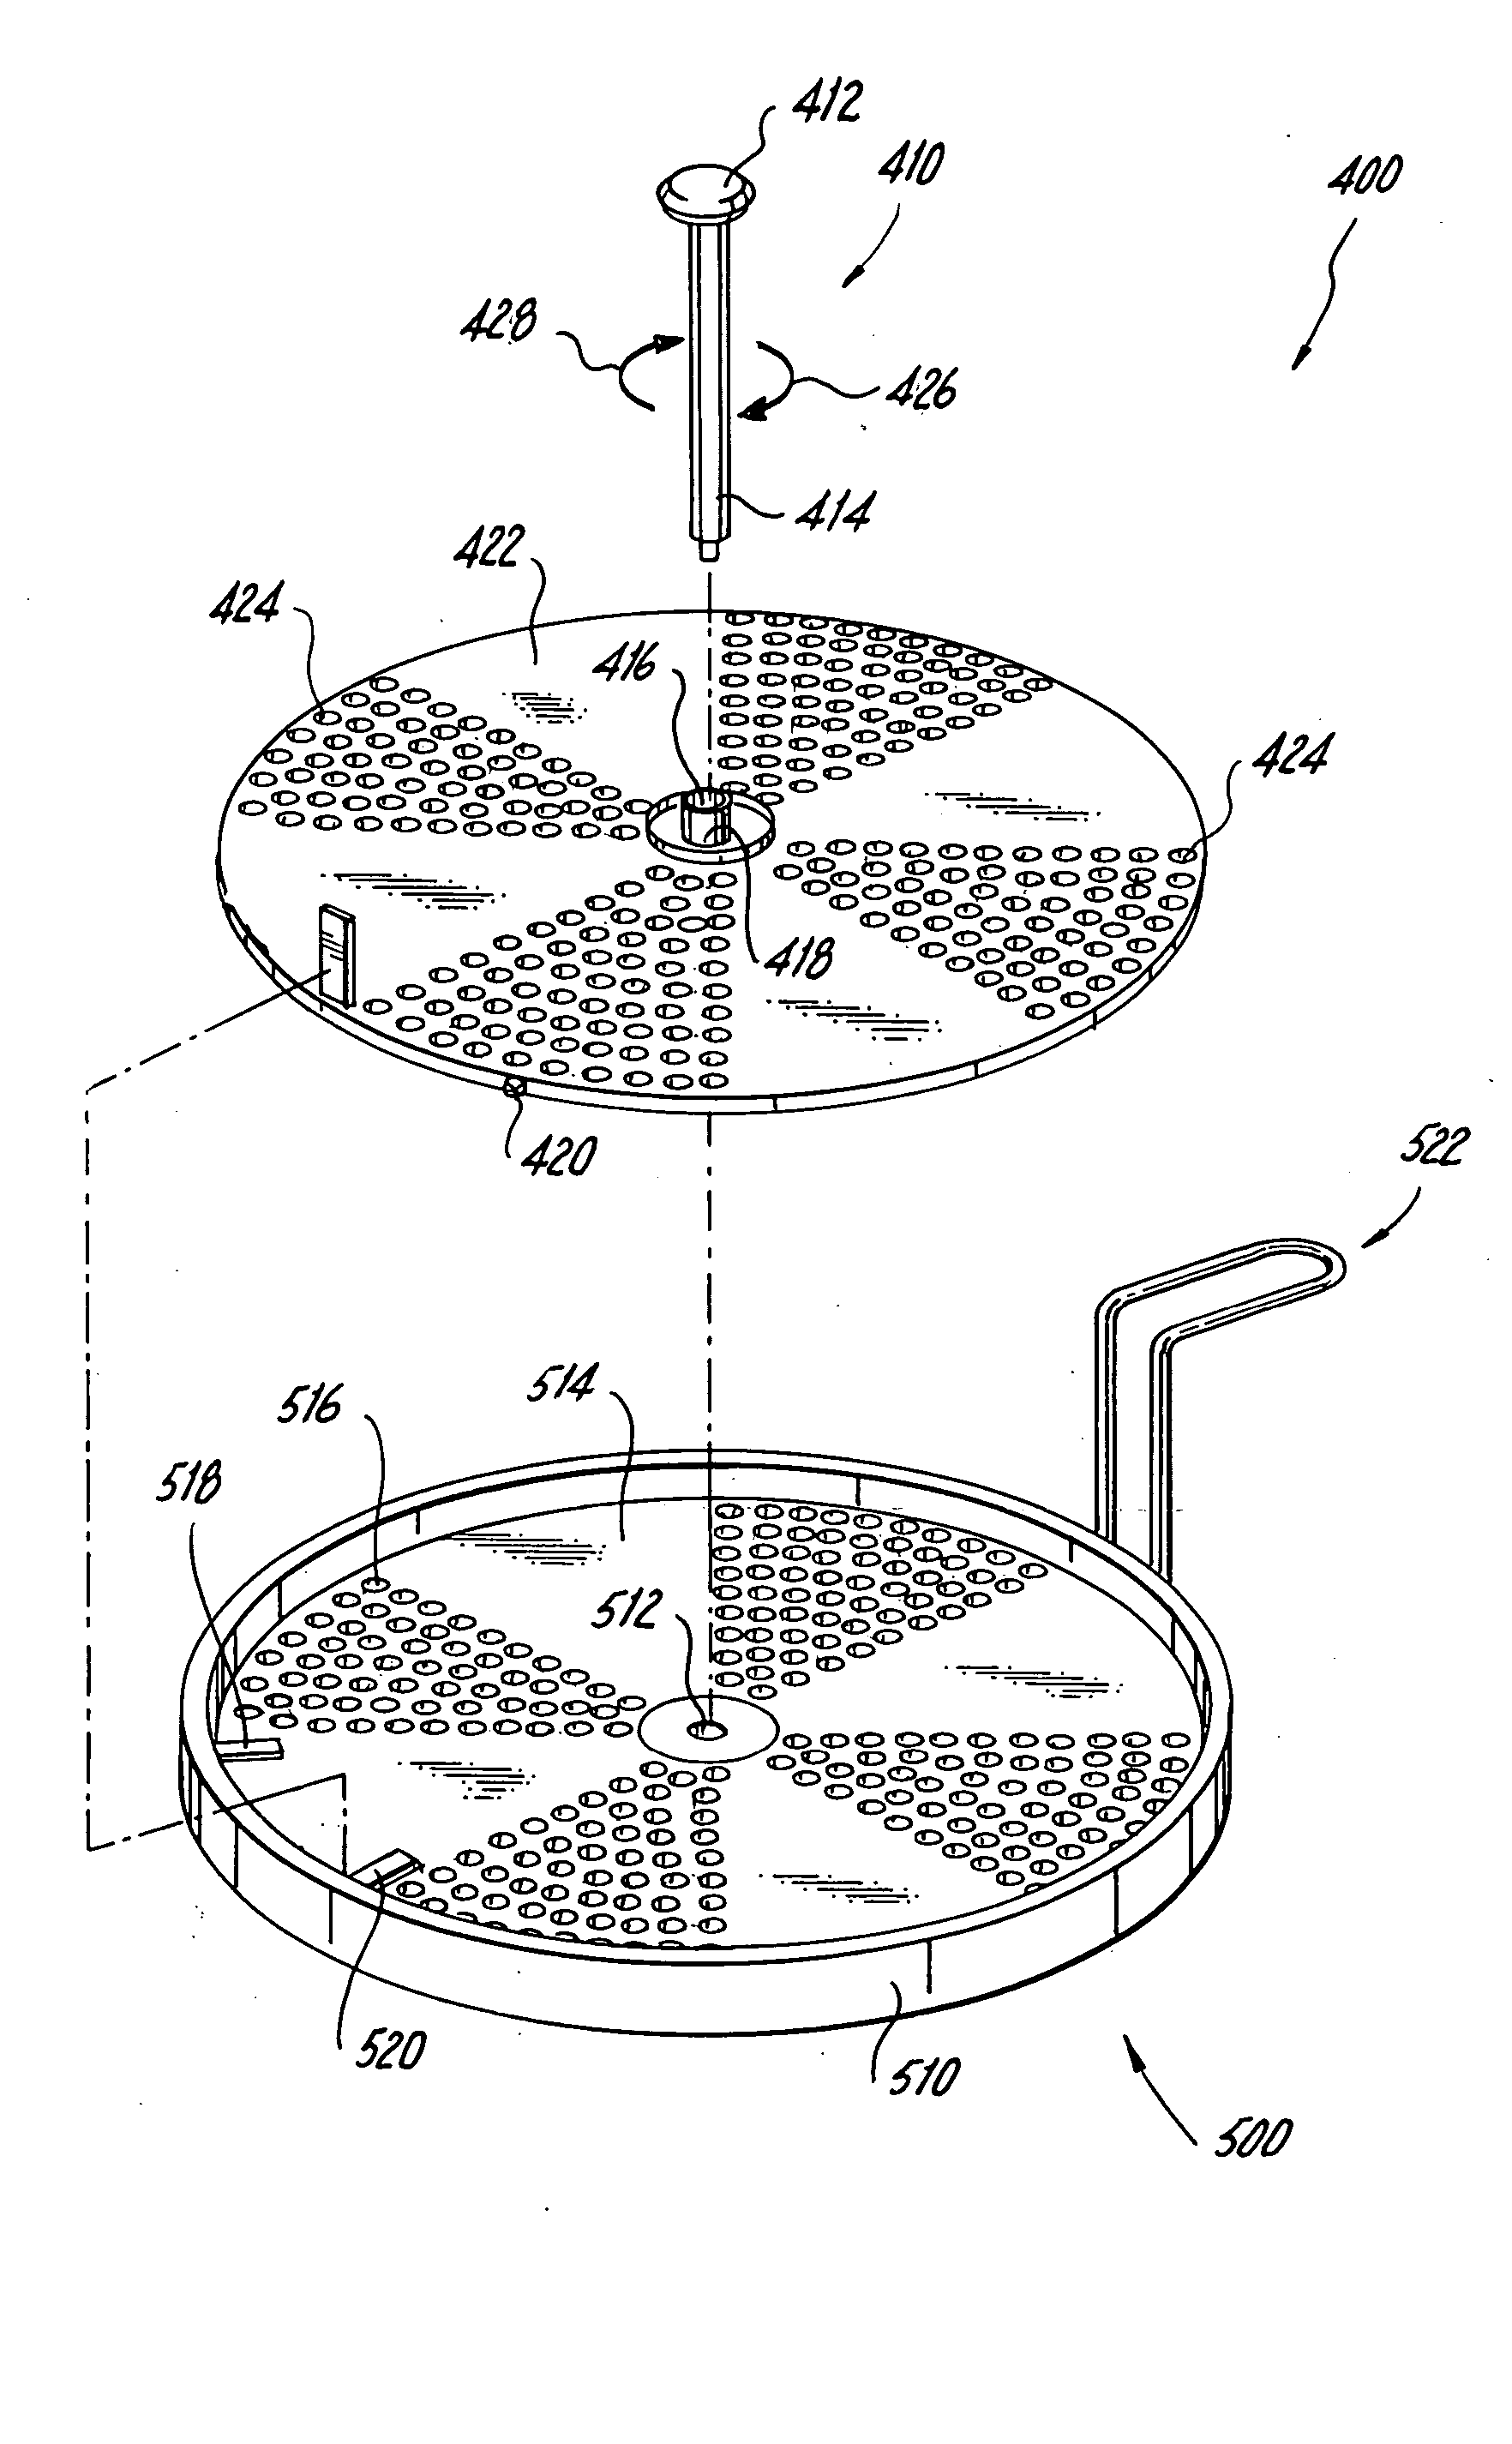 Device and method for removing solids and liquids from a pot